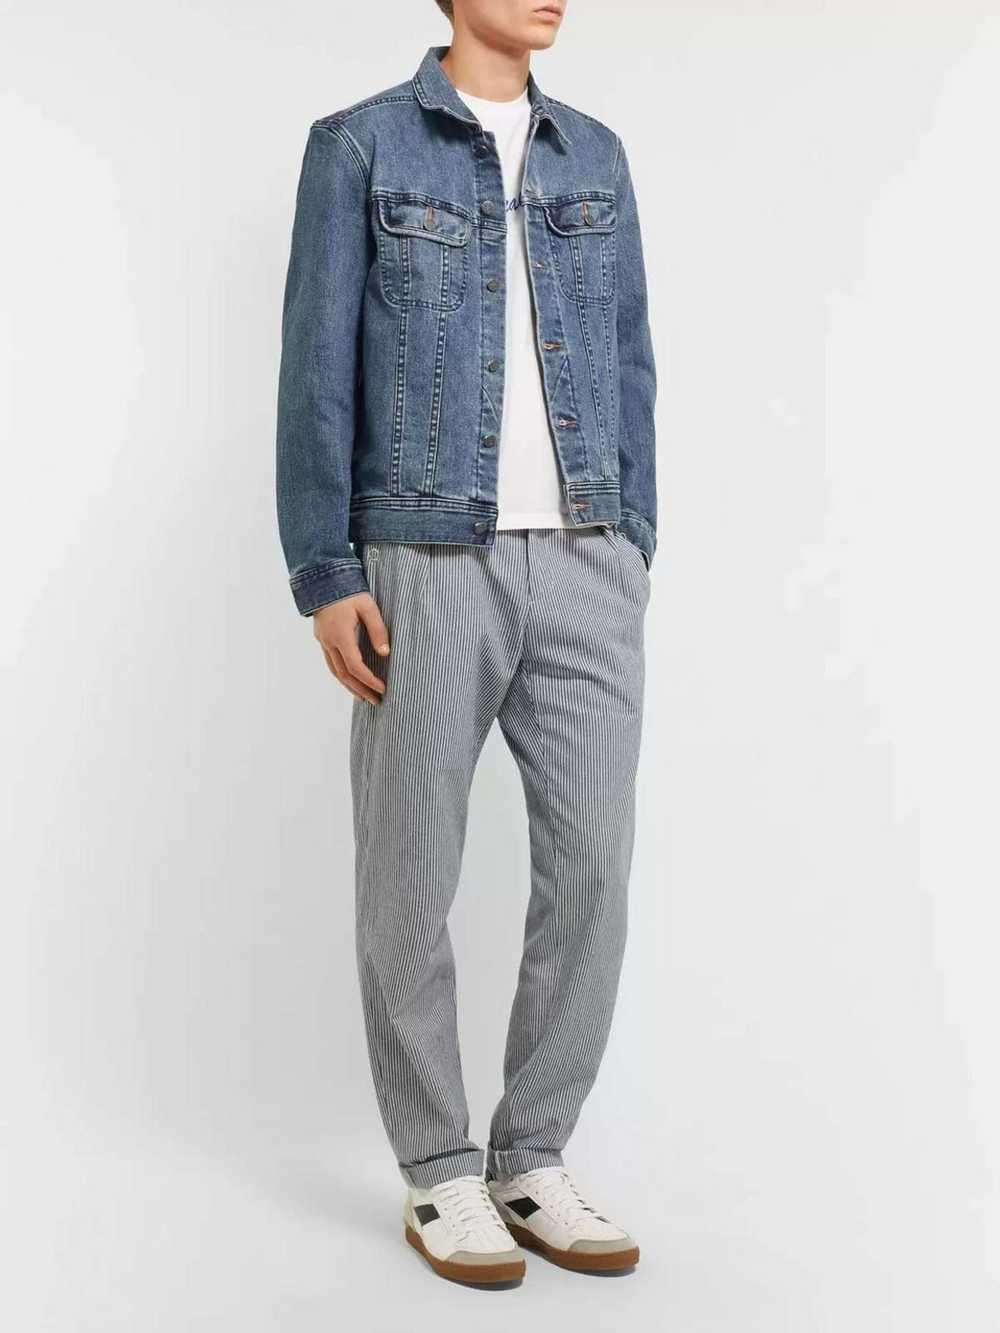 A.P.C. A.P.C. Fitted Denim Jacket - image 11